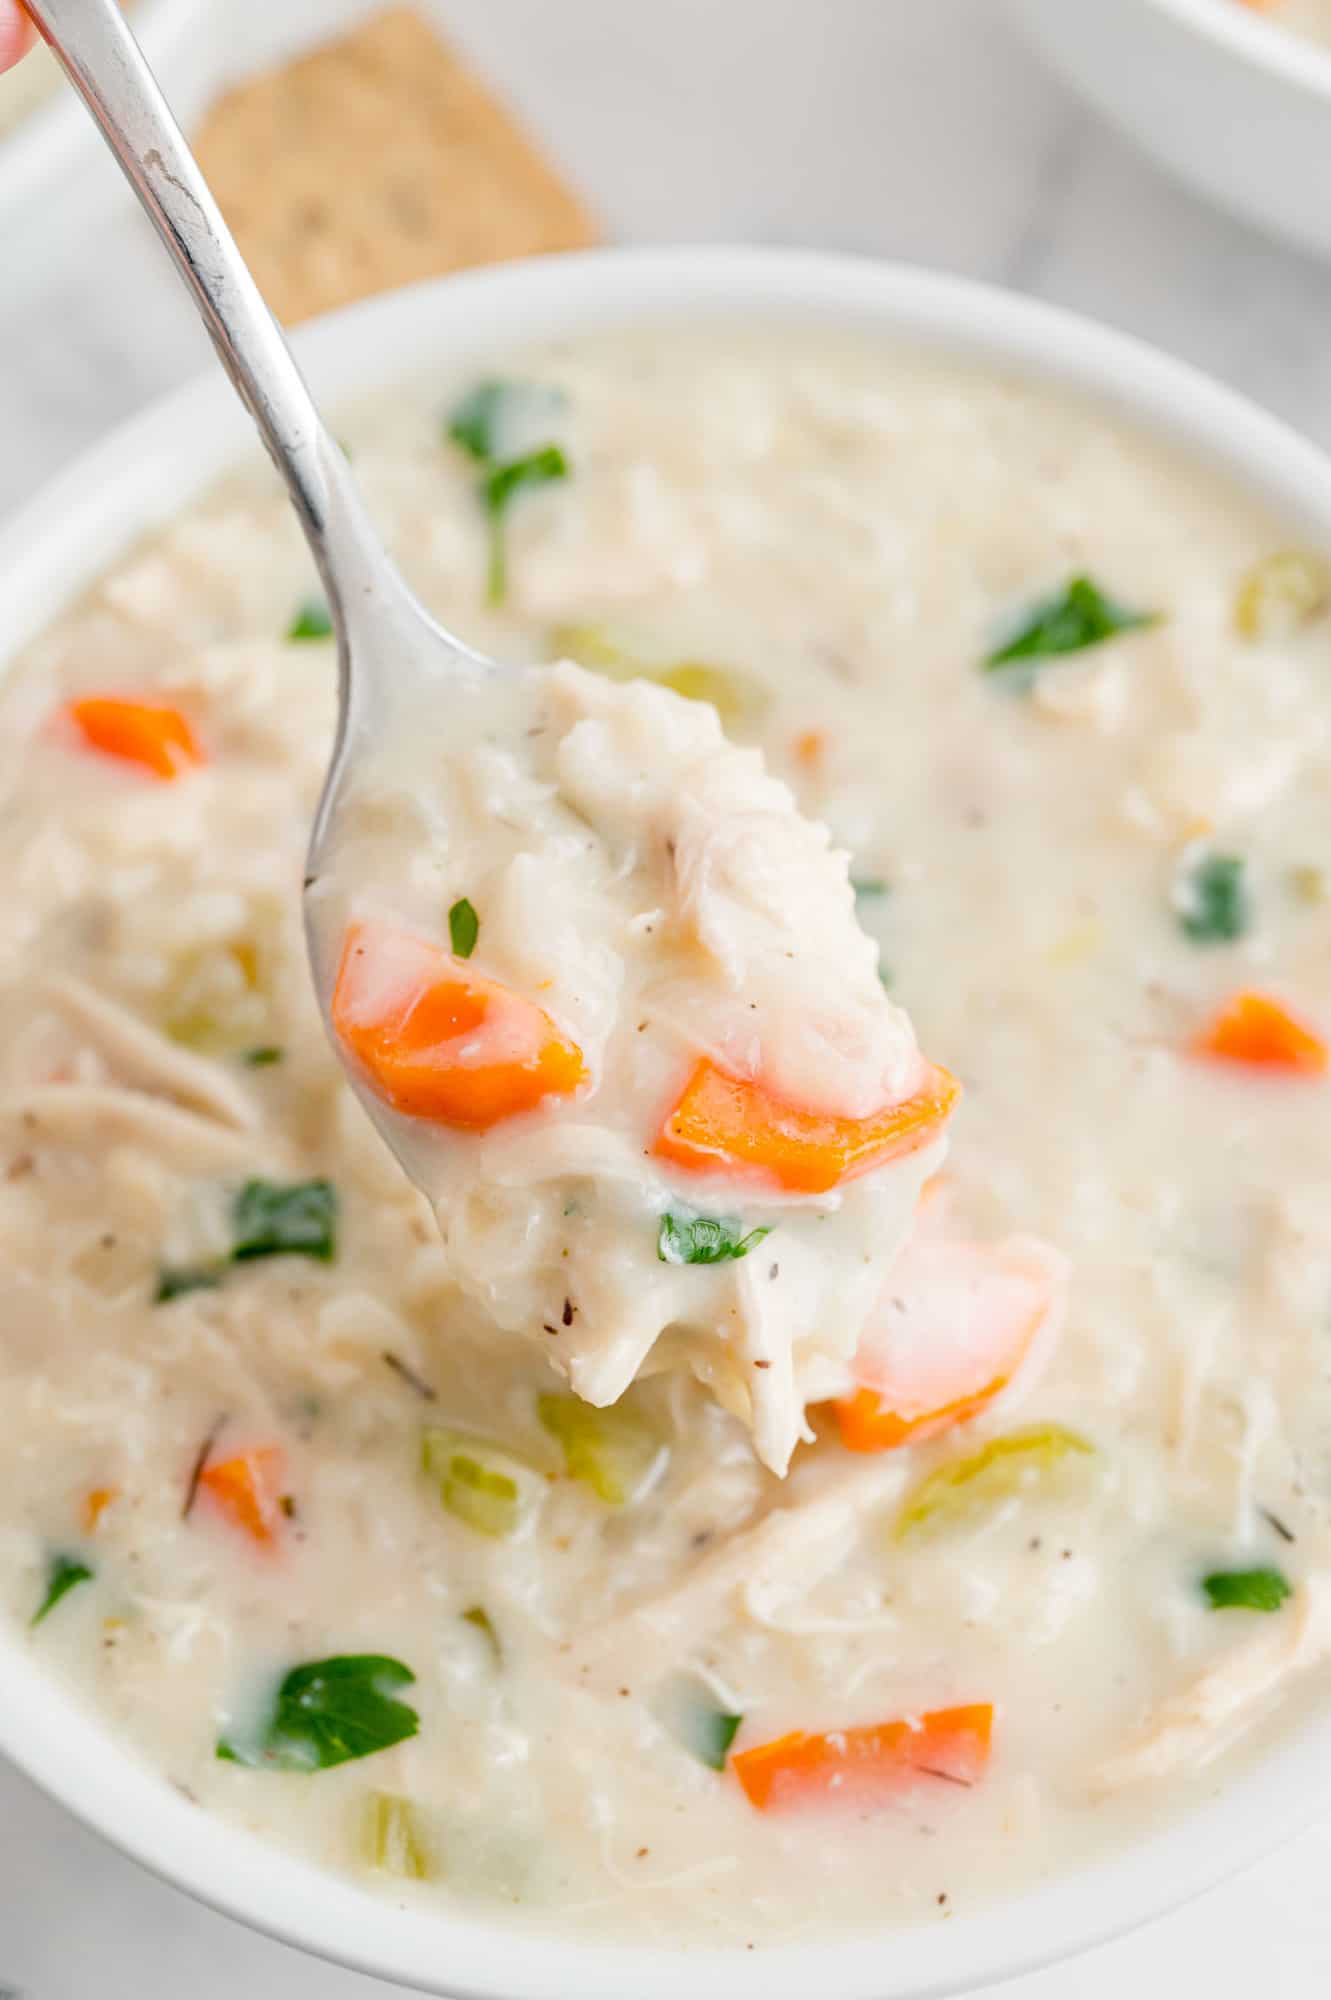 Creamy chicken rice soup shown on a spoon and in a bowl.